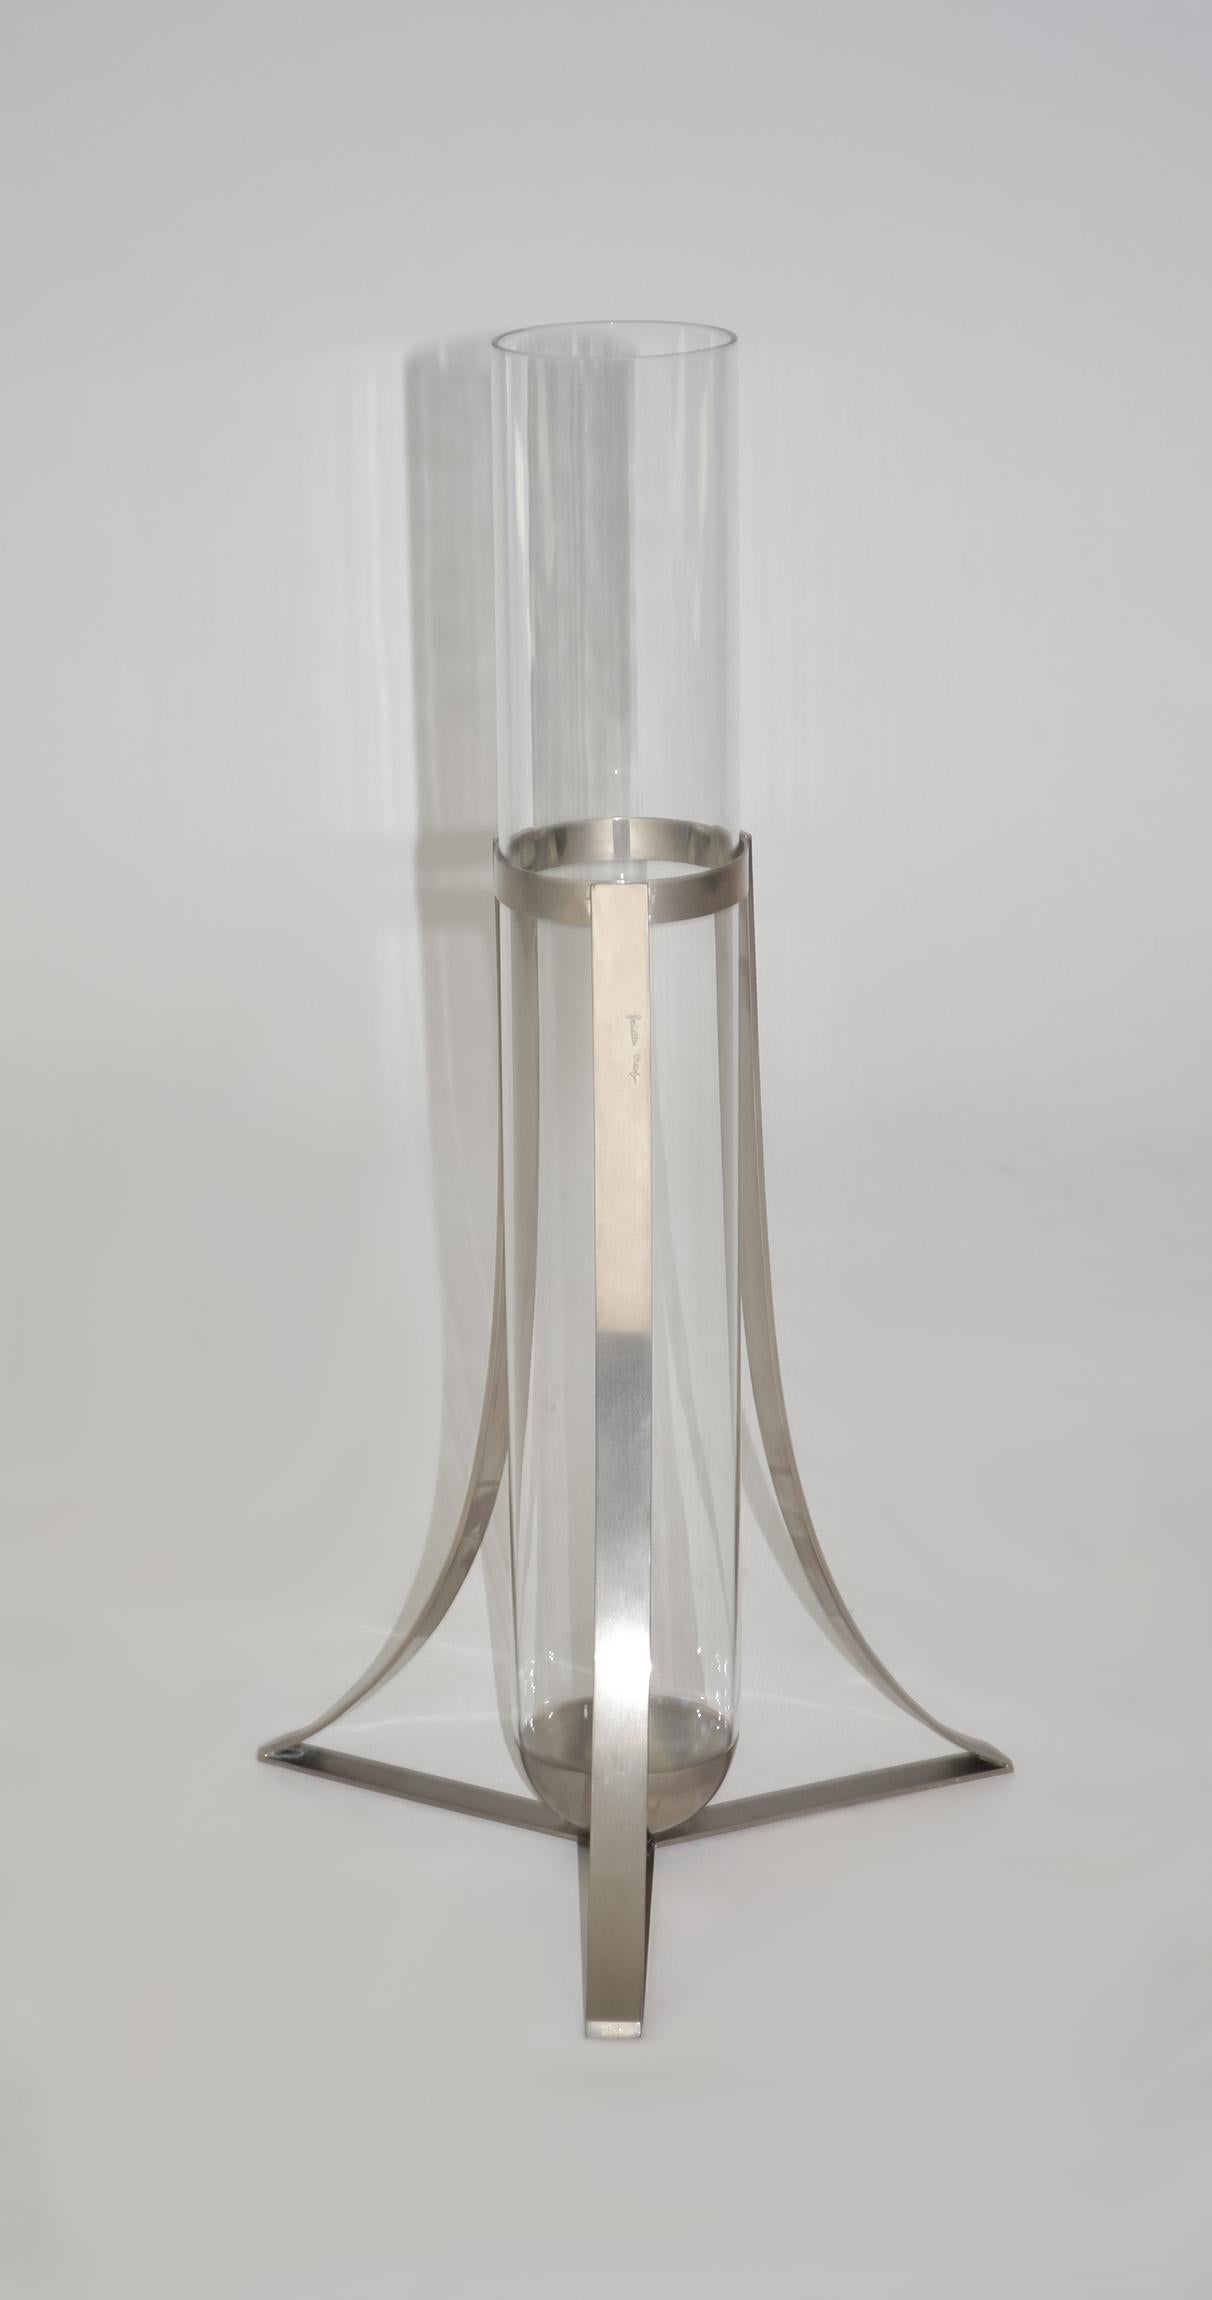 Gabriella Crespi Steel Glass Vase, Signed, Italy 1970s
Tall Glass Vase by Gabriella Crespi, Signed, Italy 1970s
Tubular Extruded Glass Floral vase with Nickel Stand by Gabriella Crespi, Italy, 70s
Featuring three buttress legs of nickeled brass 11